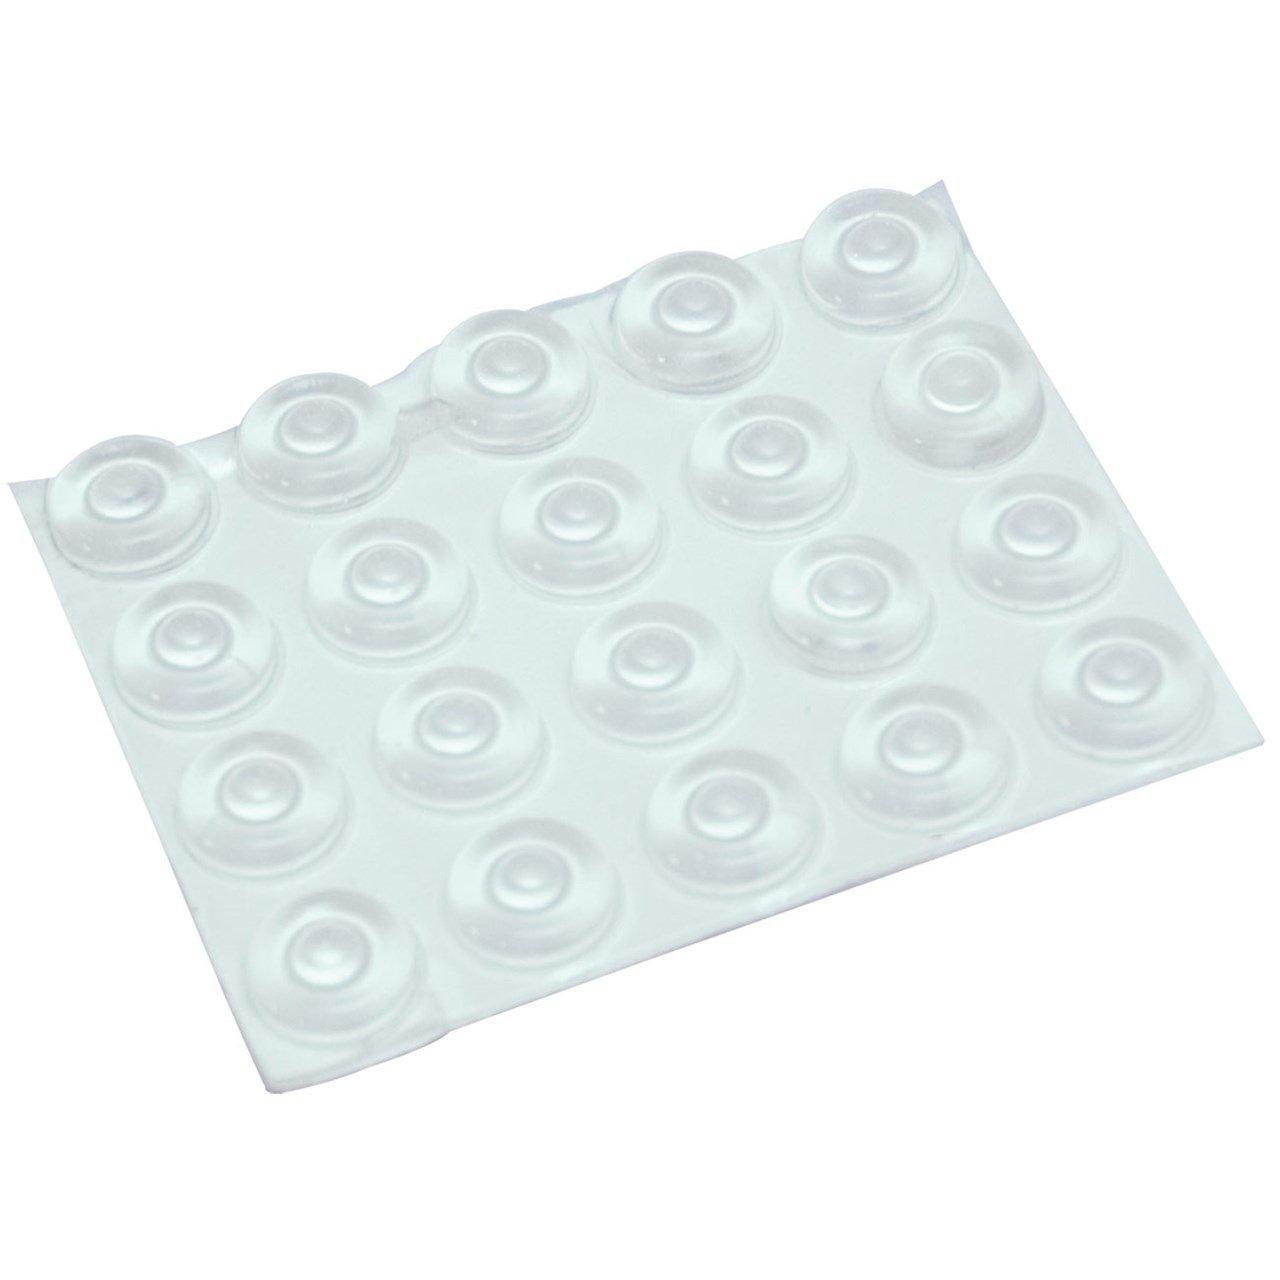 Bump Dots- Large, Soft, Clear -Round with raised center - 20-Pack - The Low Vision Store